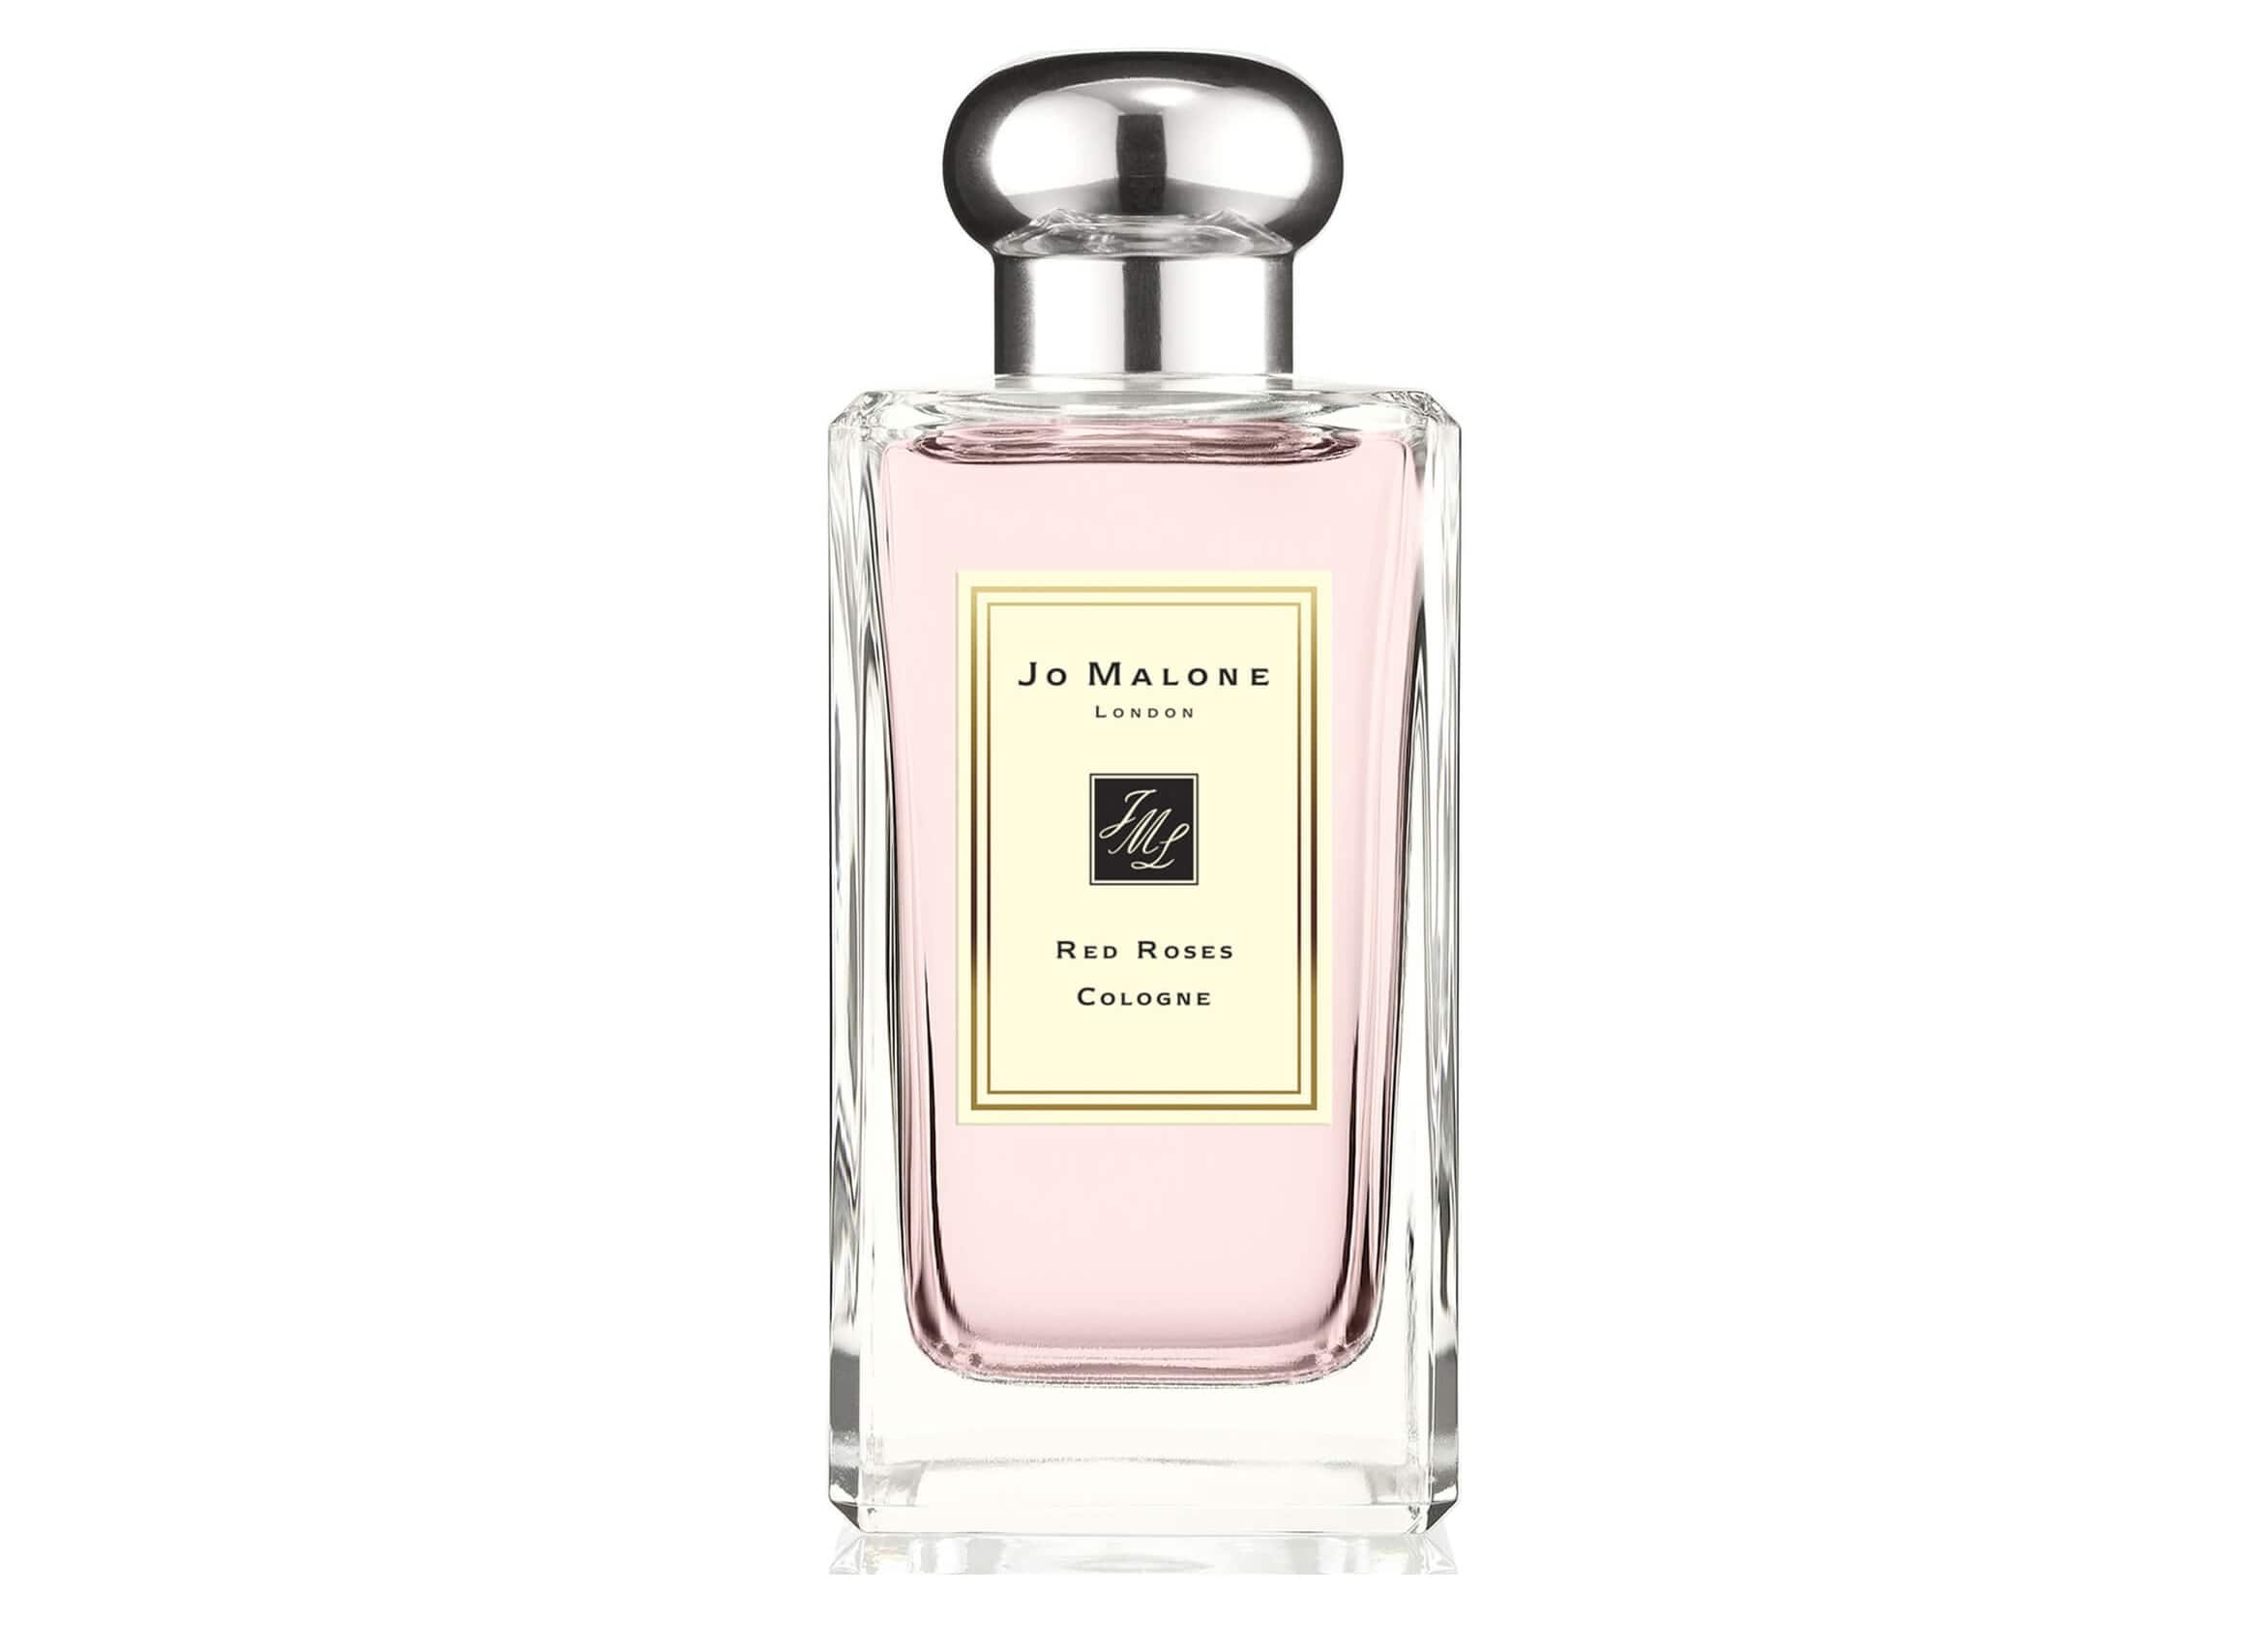 Jo Malone - Red Roses, (ジョーマローン - レッド ローズ)